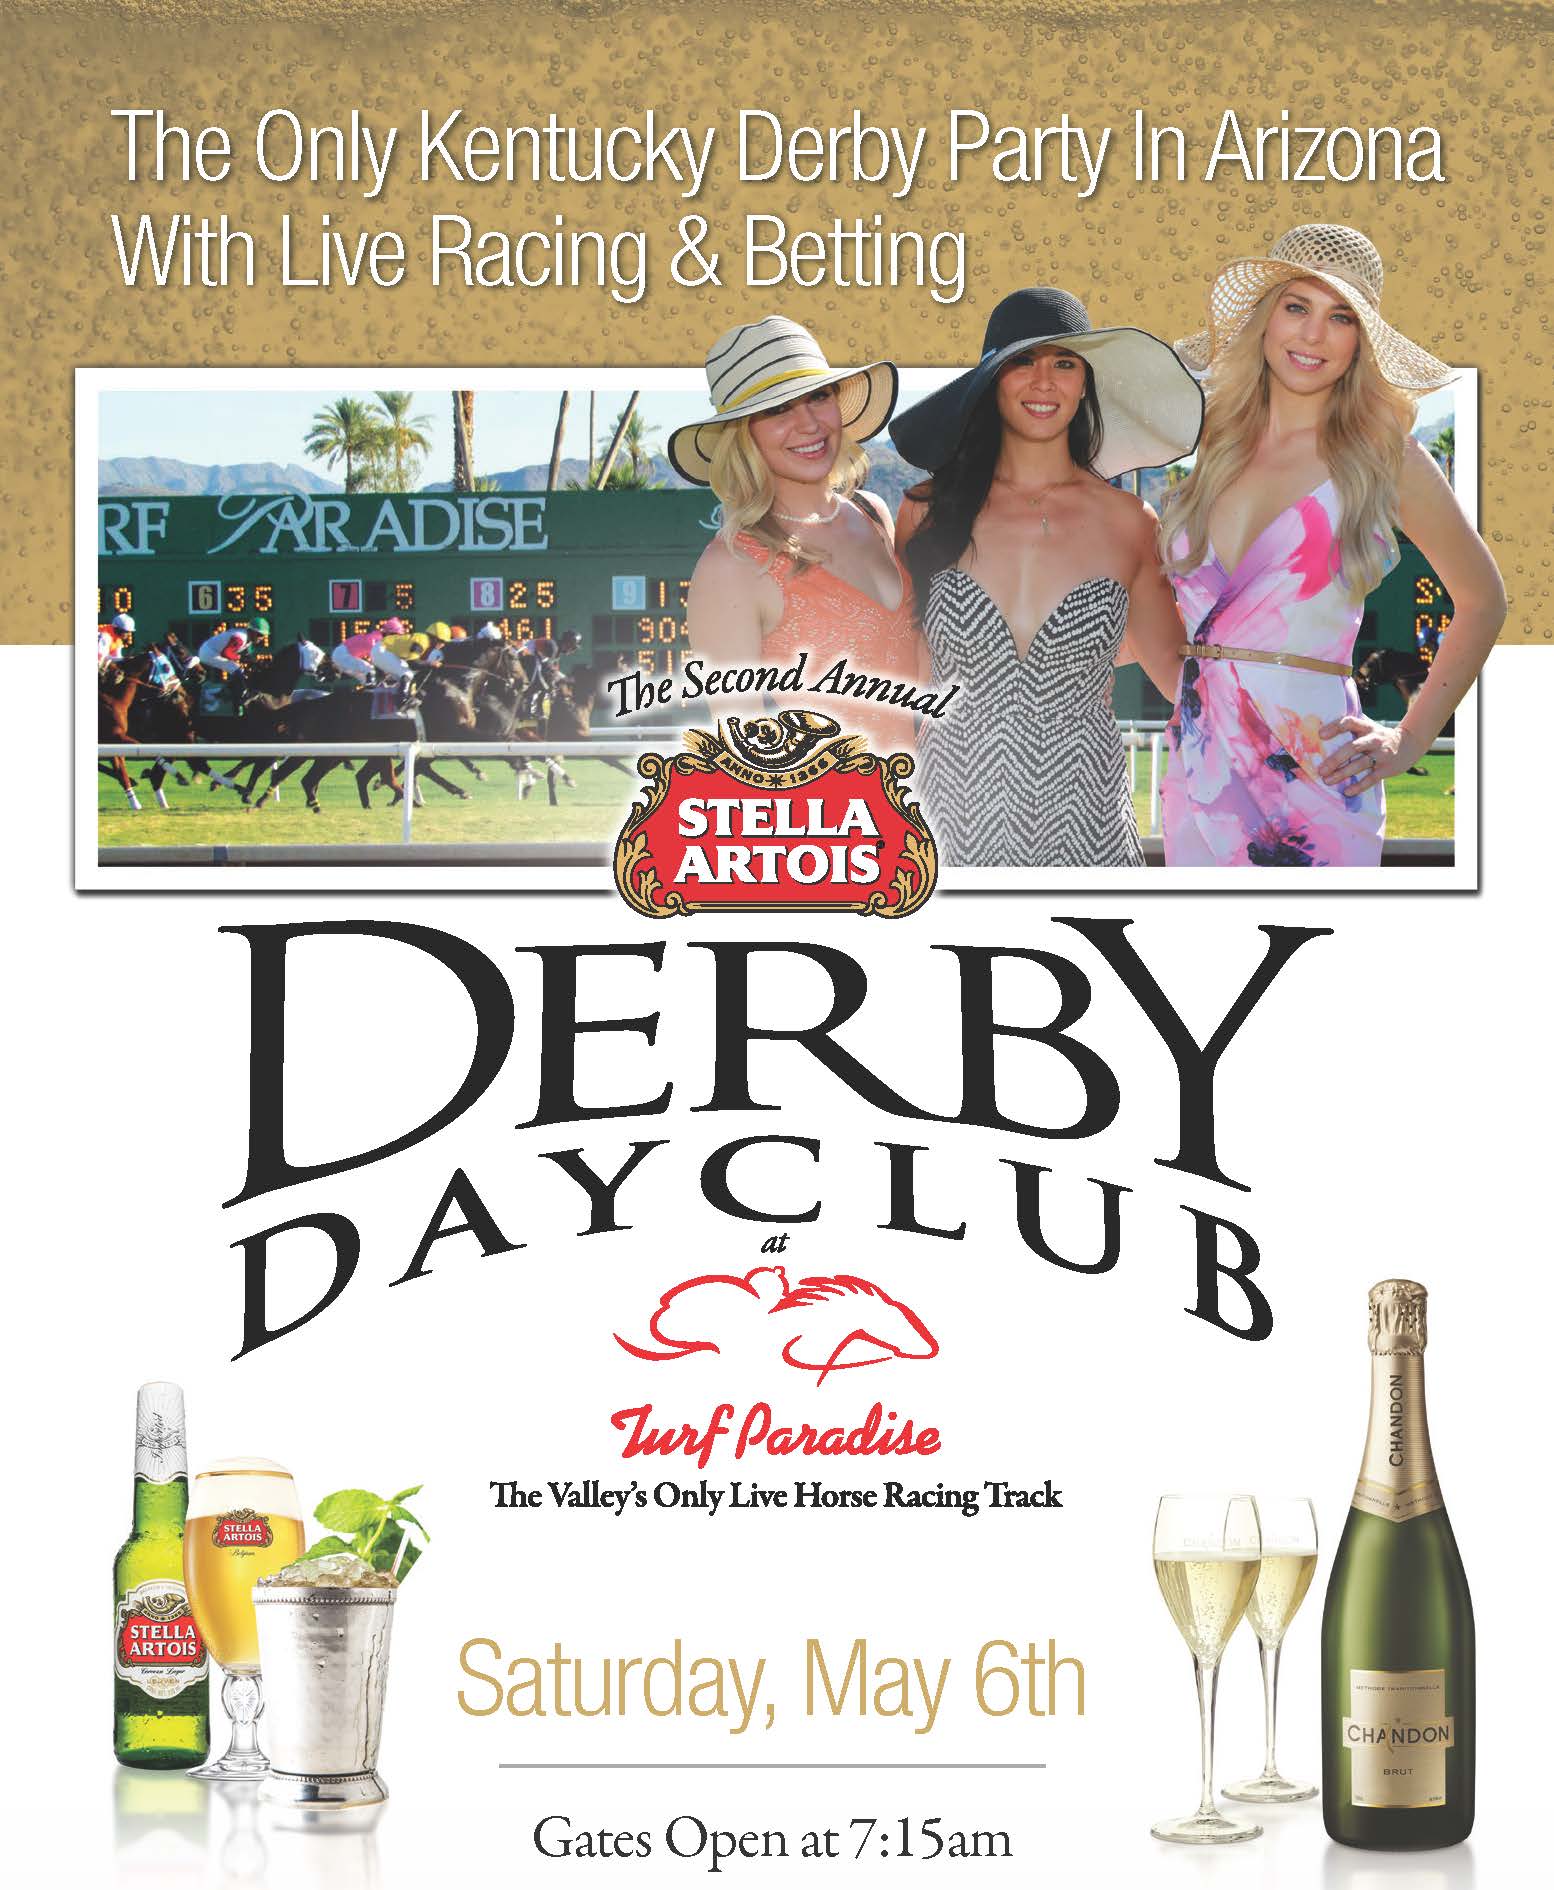 Arizona's oneofakind Kentucky Derby Party returns May 6th at Turf